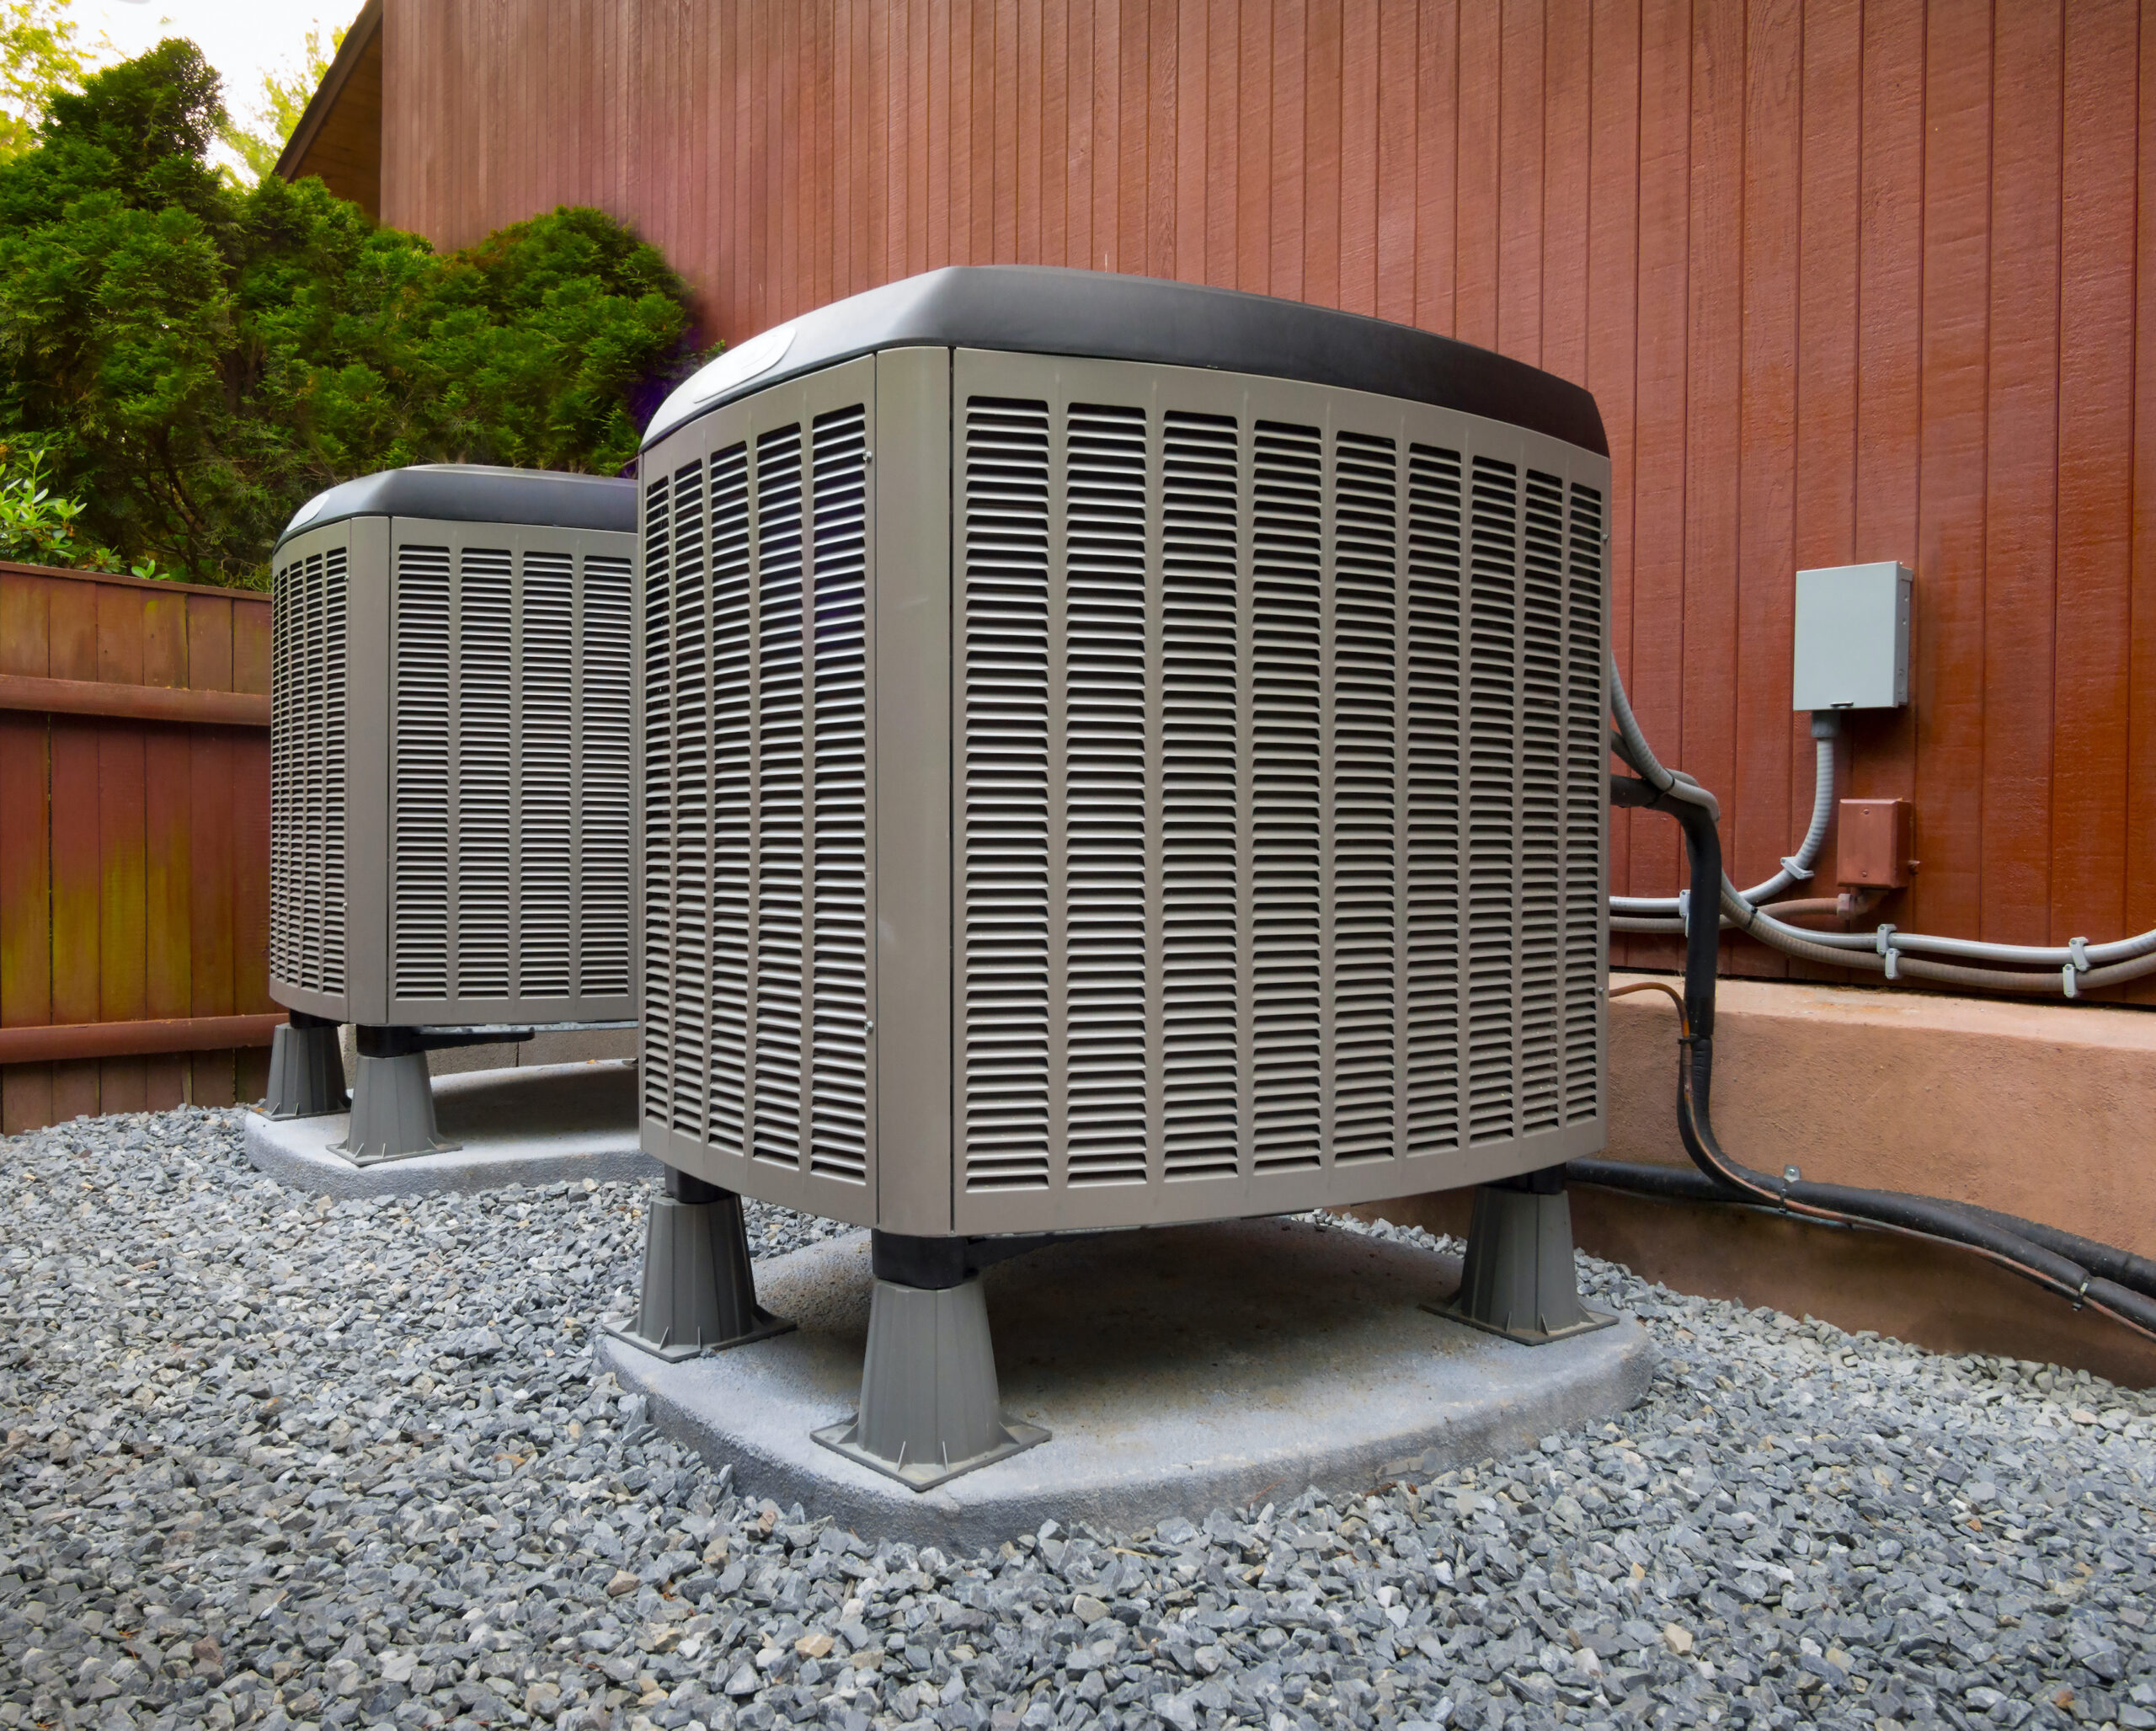 Air conditioning unit installations